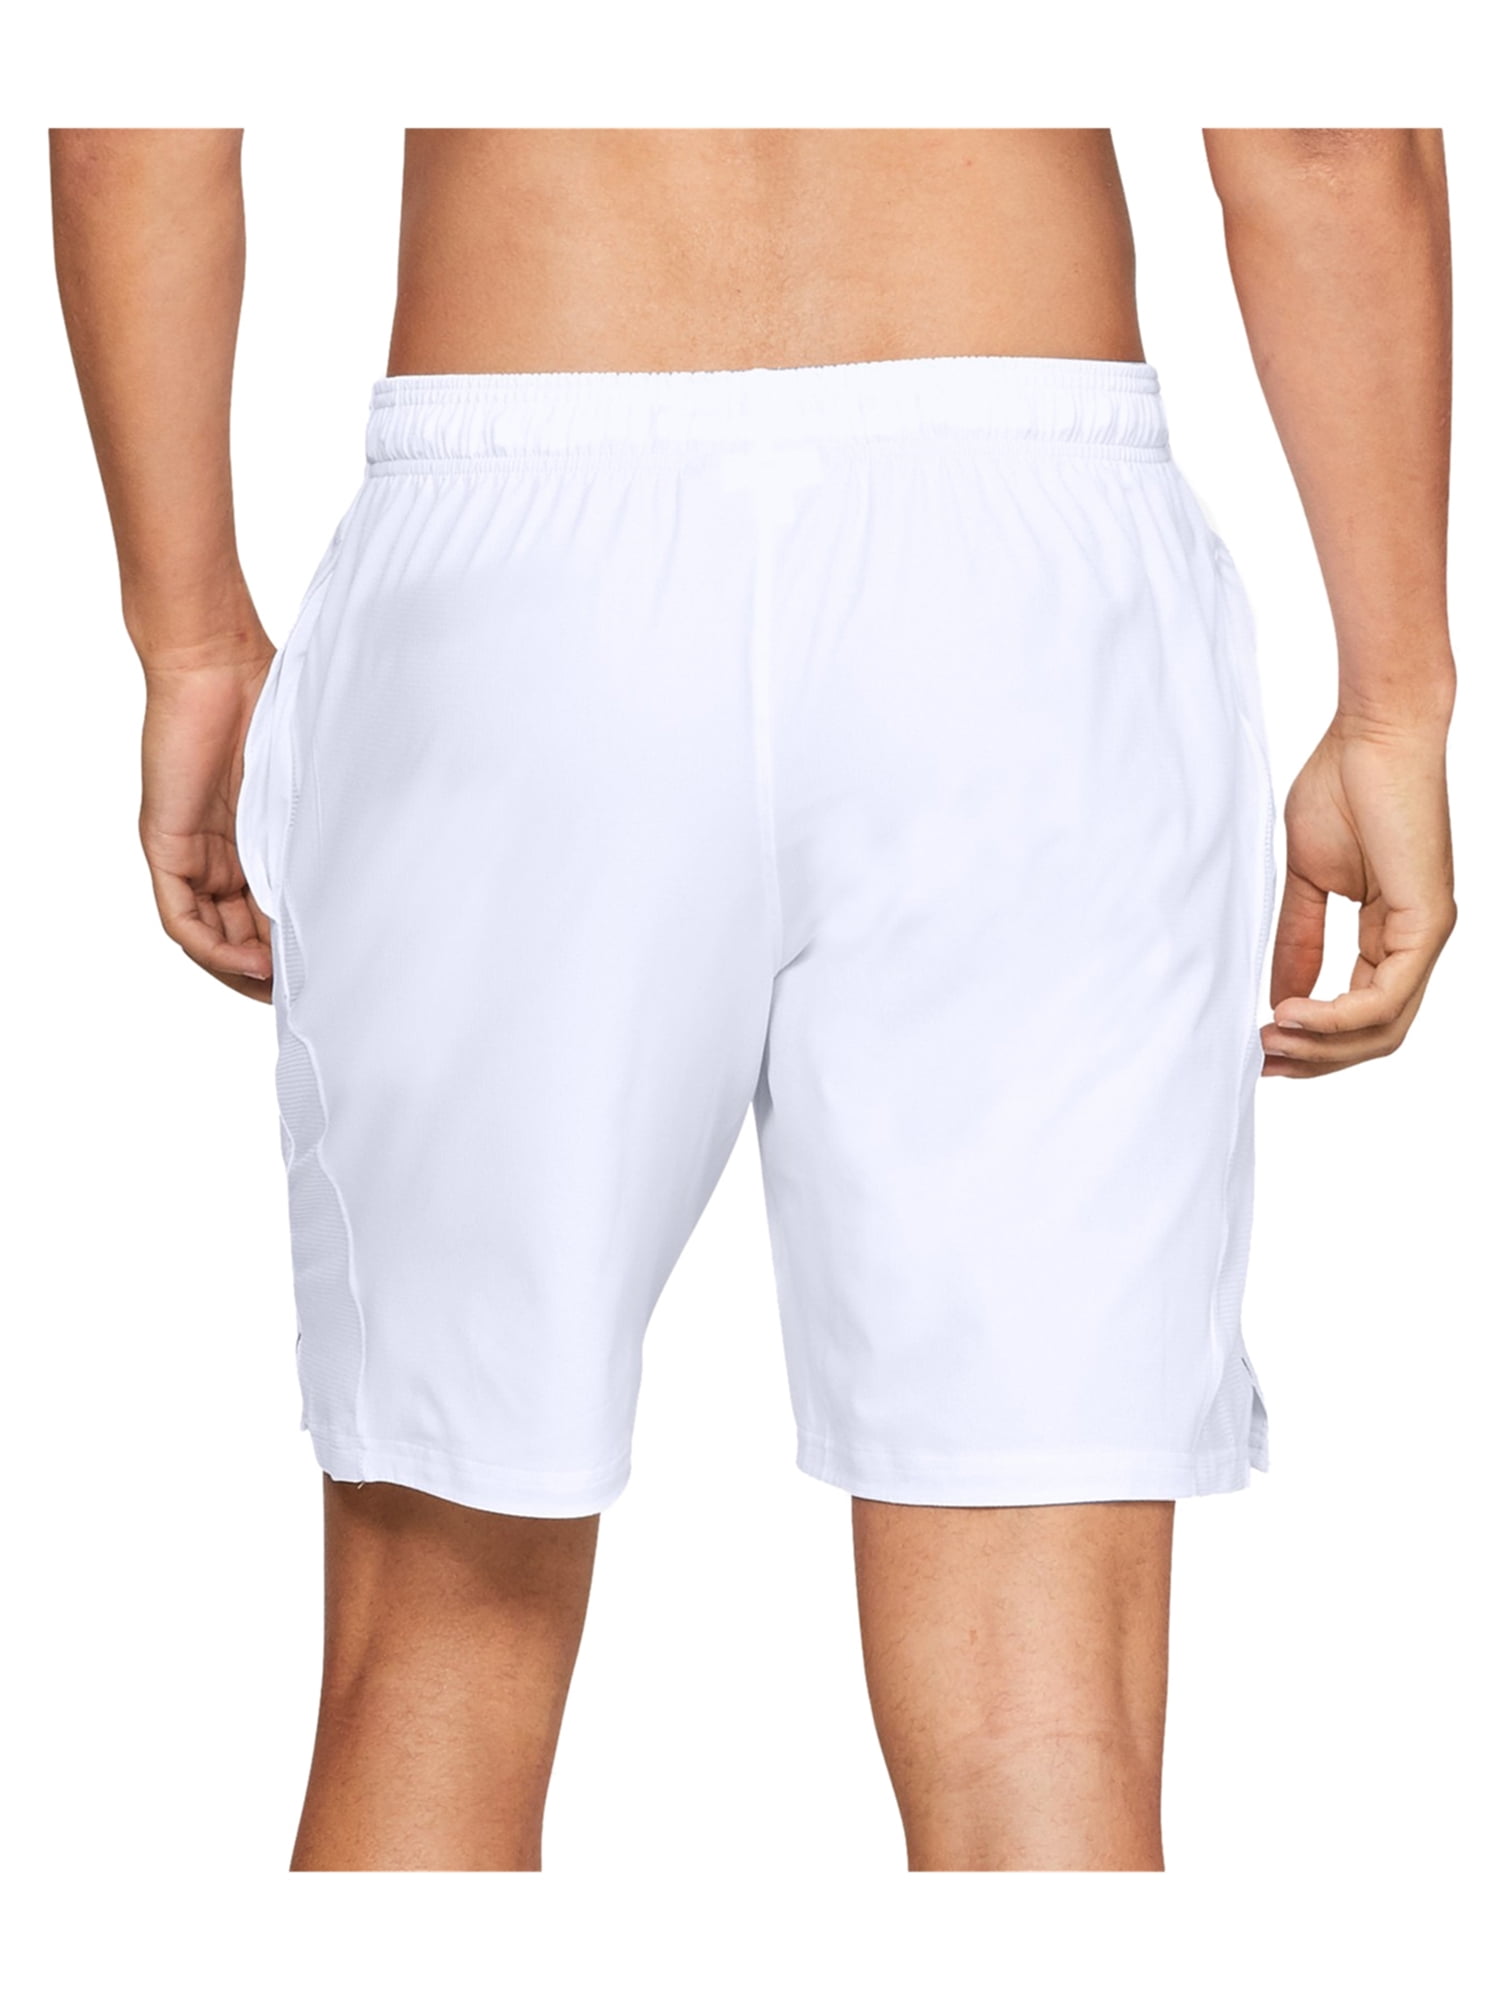 Under Armour Mens Cage Training Athletic Workout Shorts white S ...